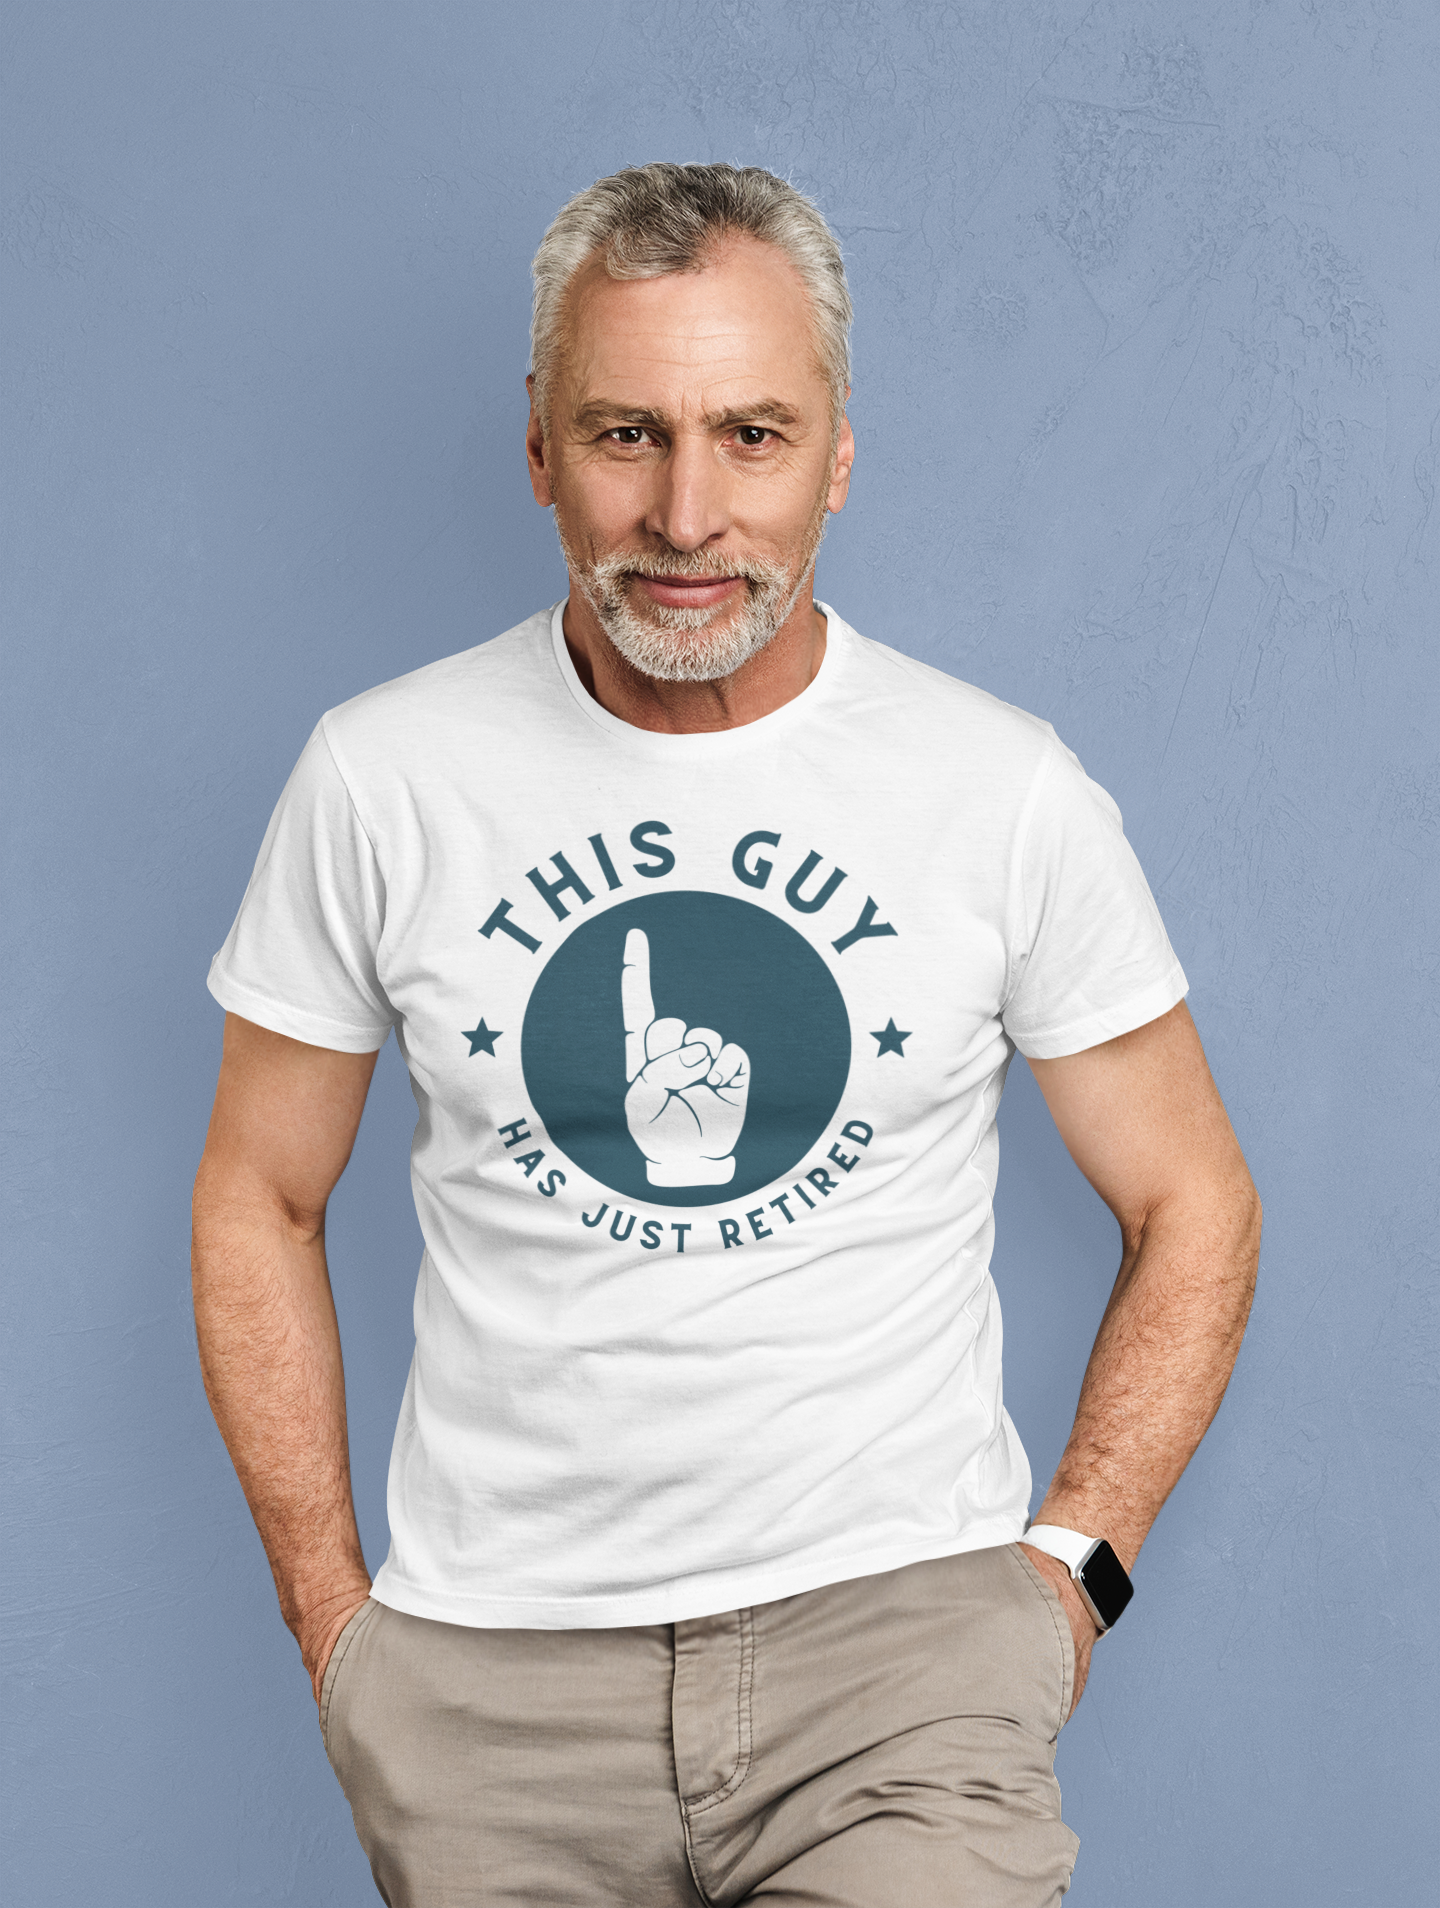 this-guy-just-retired-gift-for-retiree-retirement-t-shirt-colleague-retirement-tshirt-funny-retirement-gift-unisex-heavy-cotton-tee